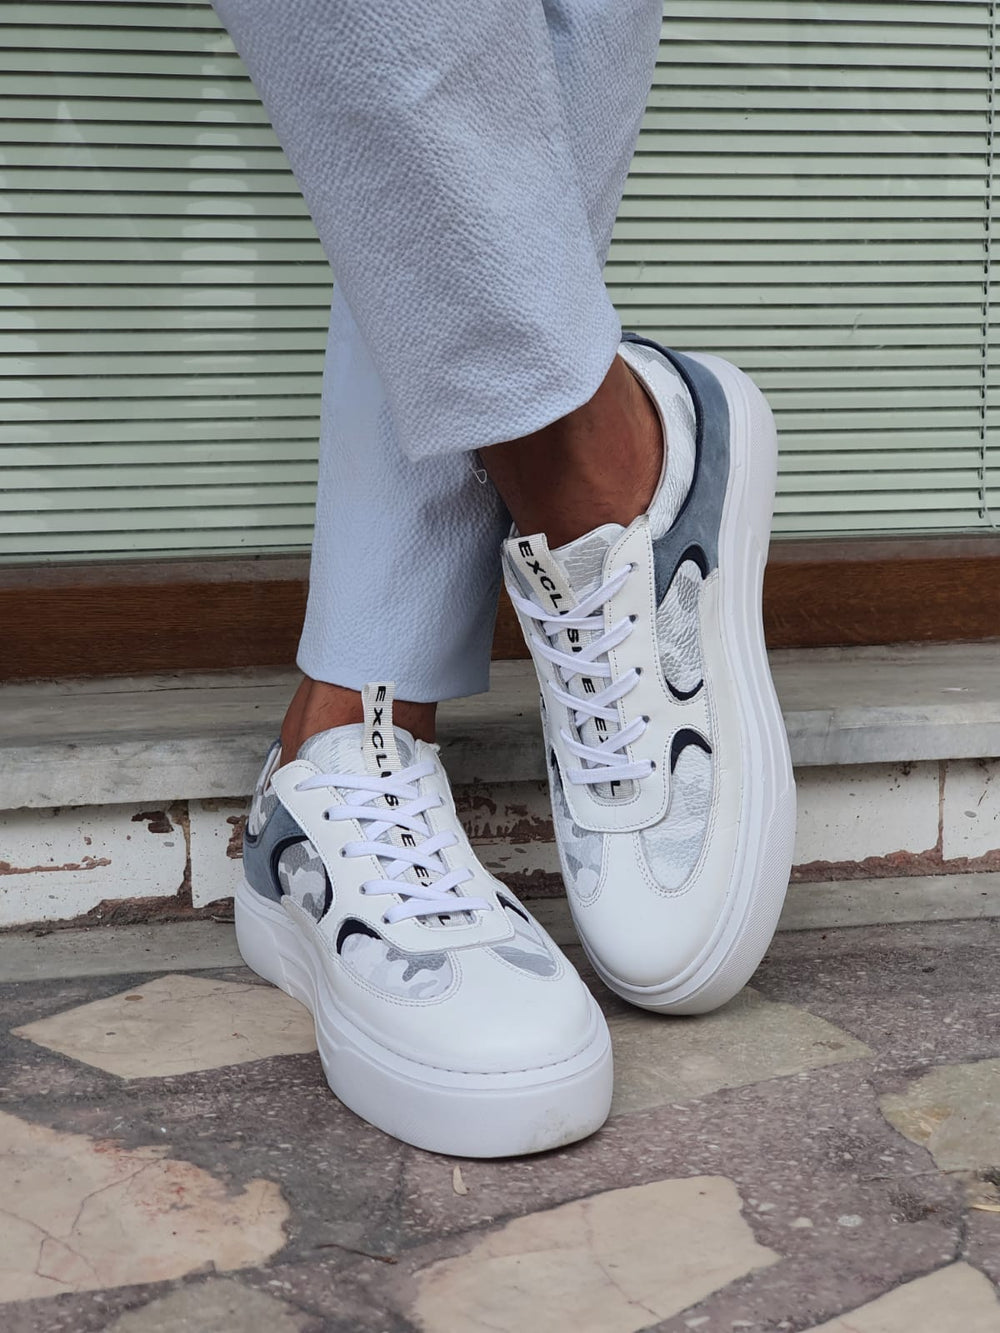 Lucas MenStyleWith Eva Sole White & Blue Sneakers - MENSTYLEWITH